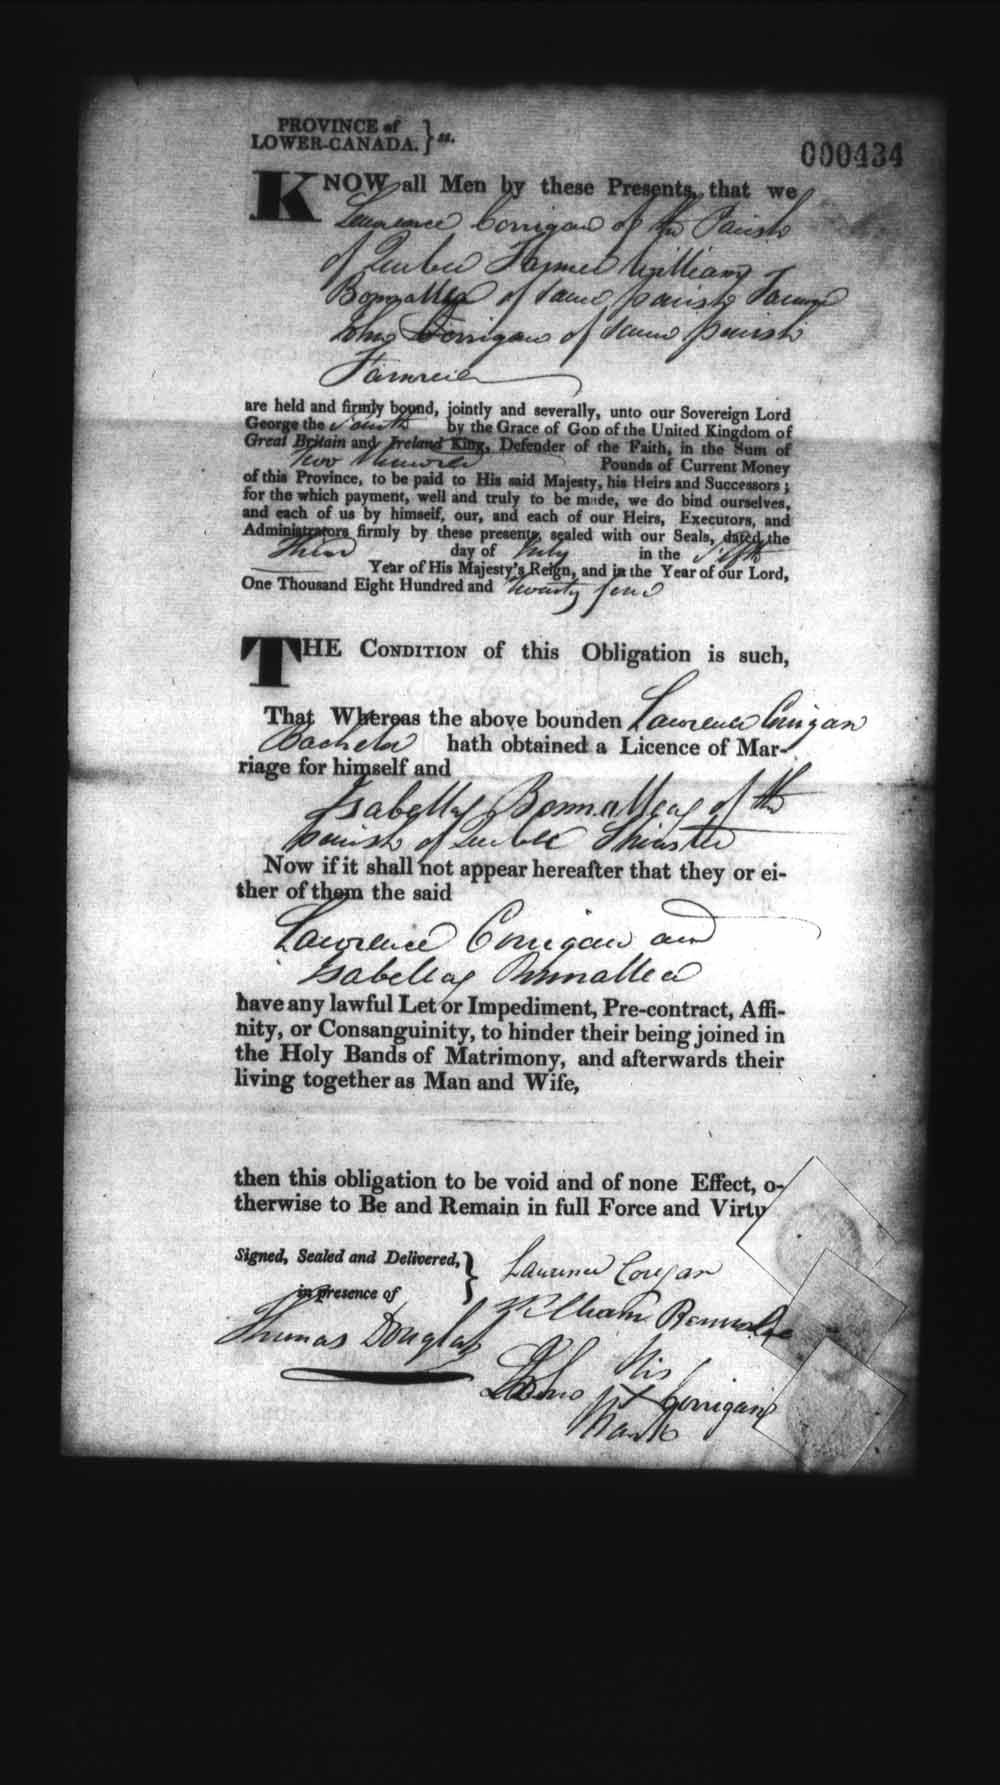 Digitized page of Upper and Lower Canada Marriage Bonds (1779-1865) for Image No.: e008236338